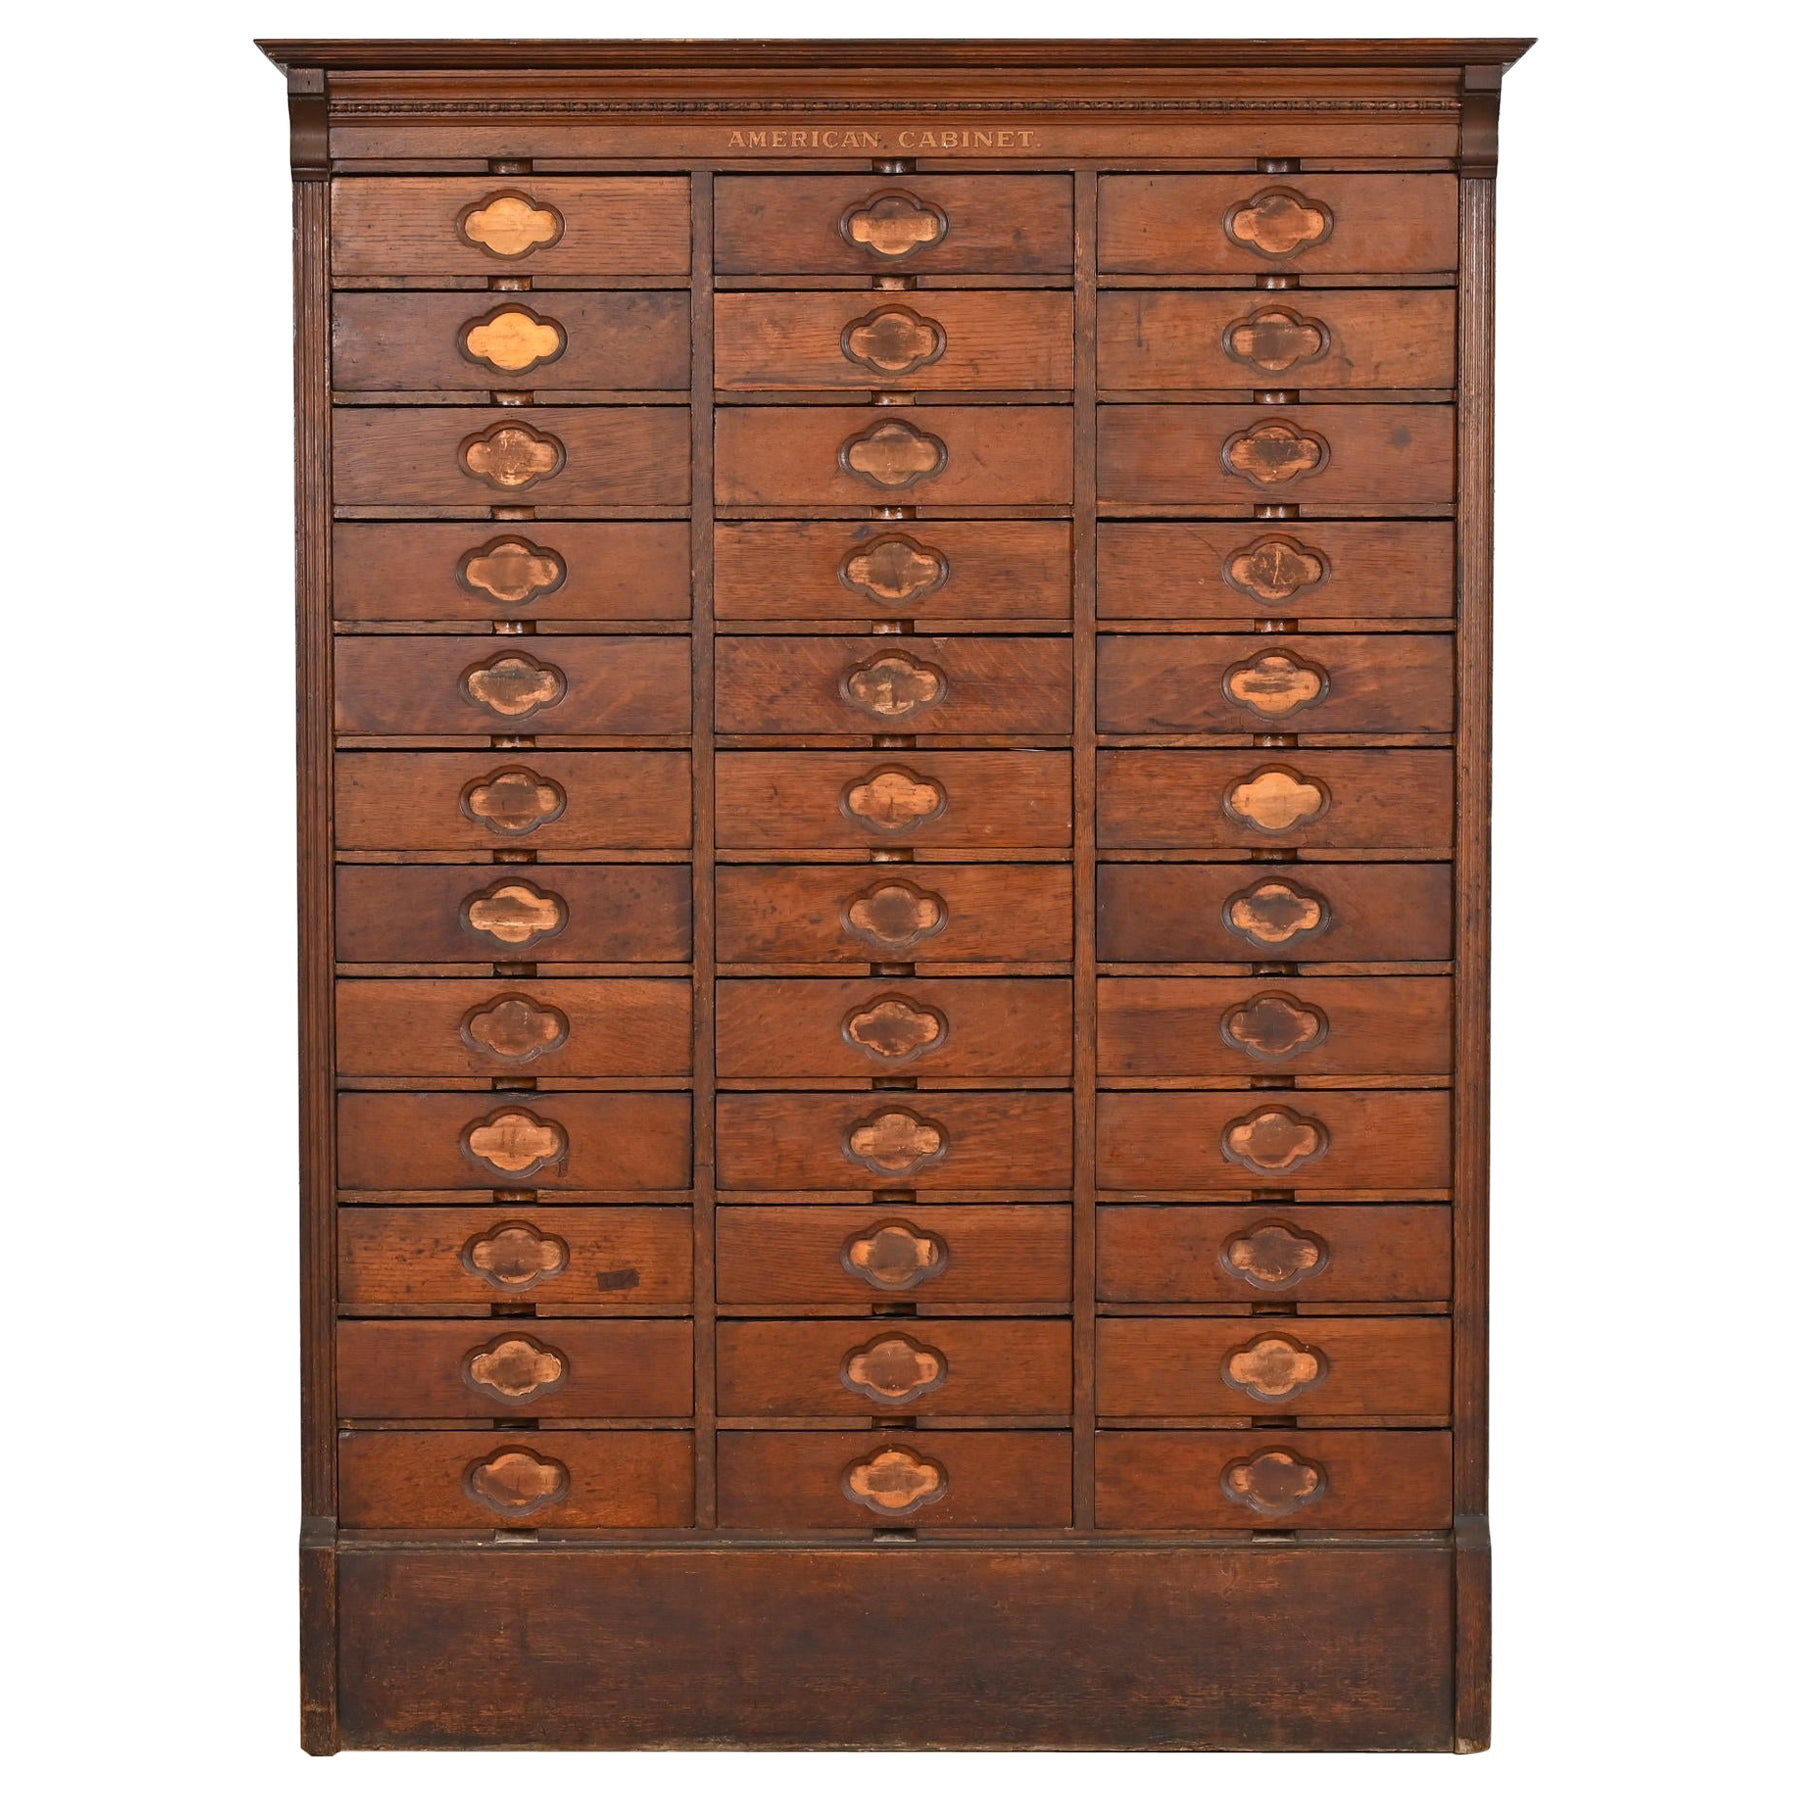 Antique Arts & Crafts 36-Drawer File Cabinet by American Cabinet Co., Circa 1900 For Sale